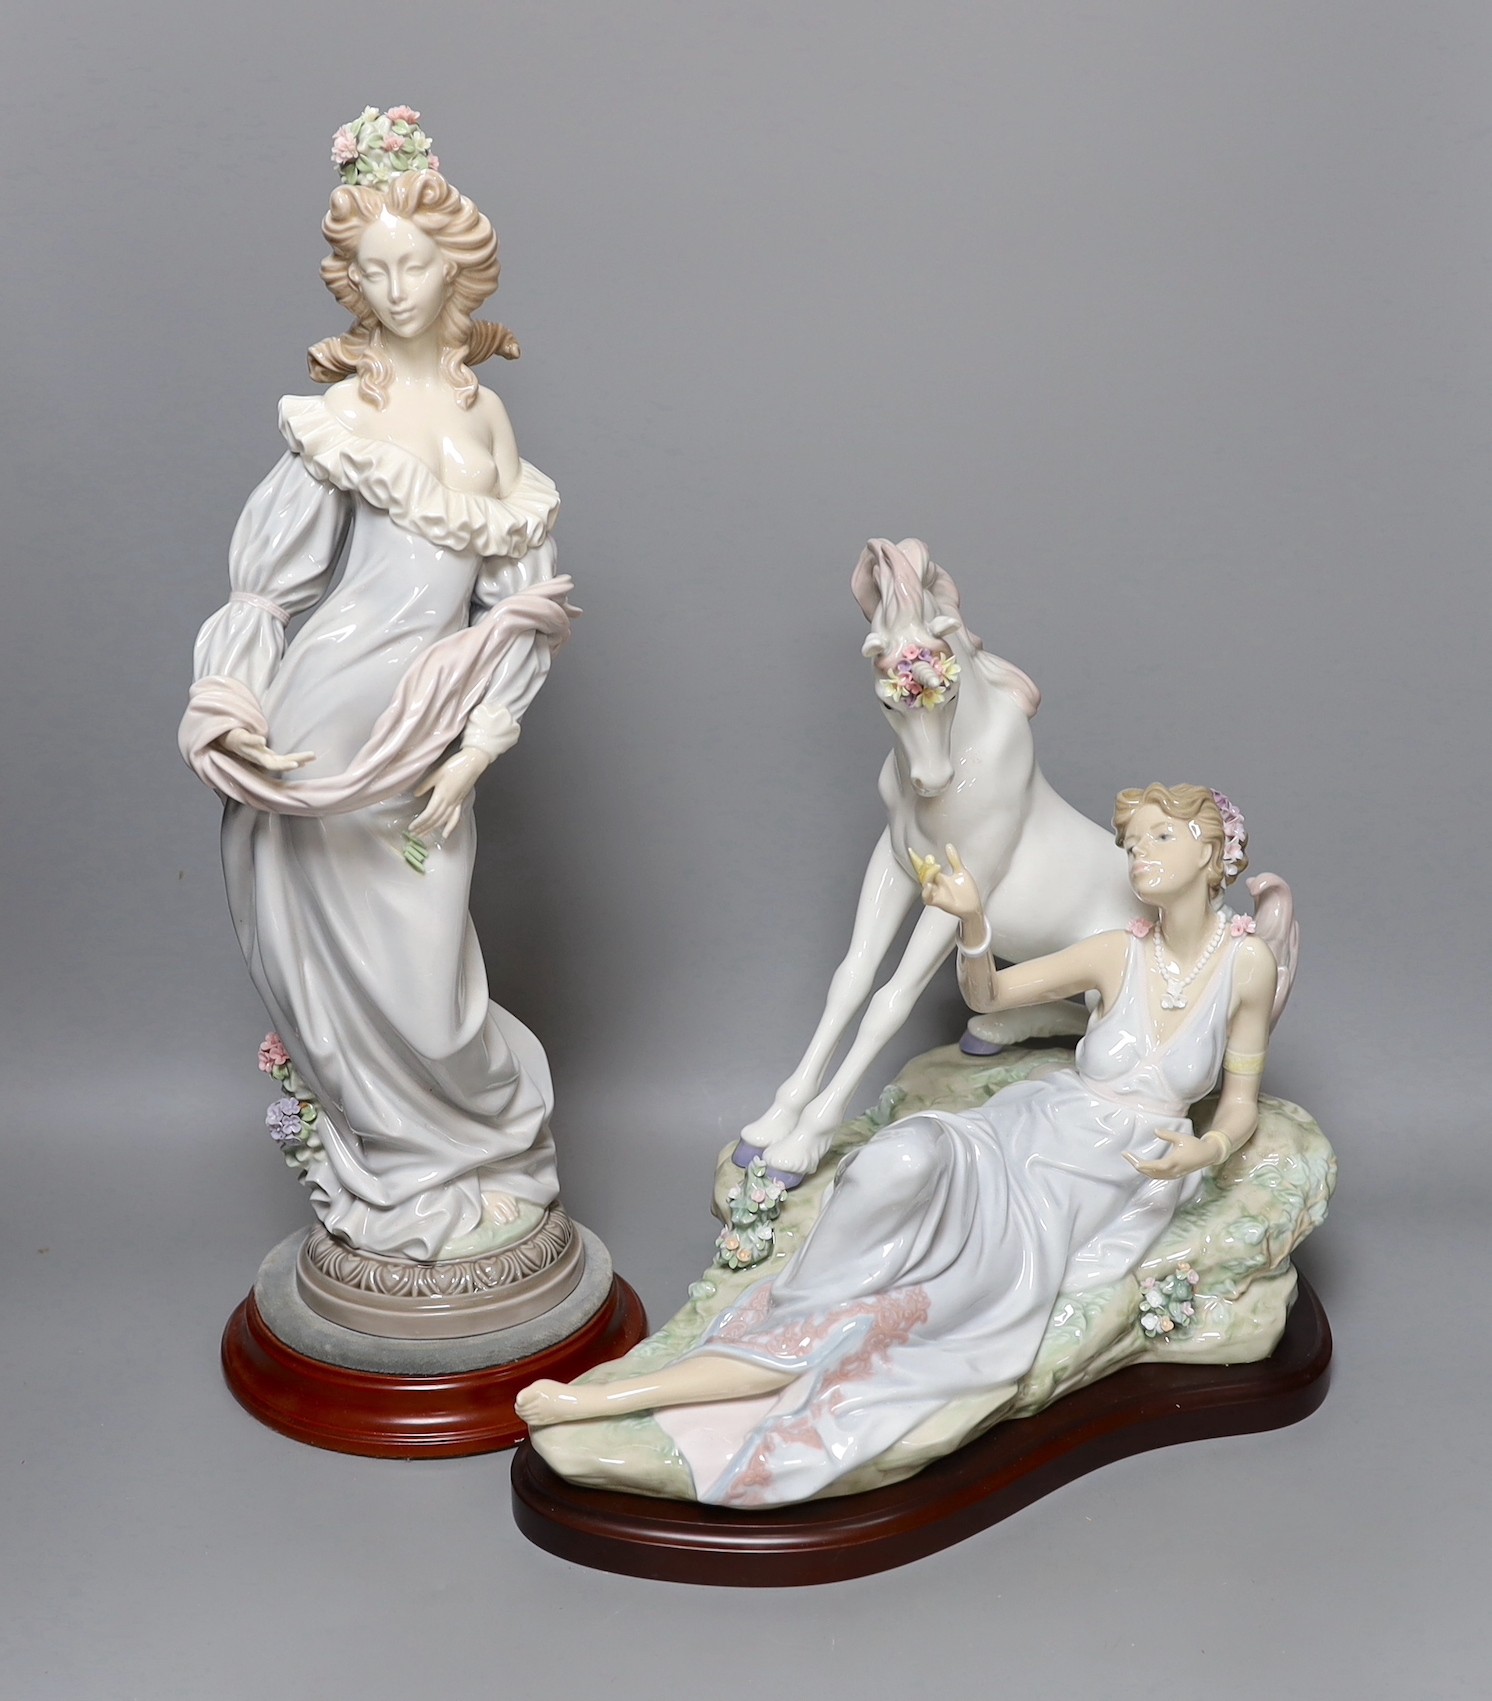 A Lladro figure of a lady and a similar figure group of a lady and a unicorn. Both on hardwood stands, tallest 41cm excluding stand